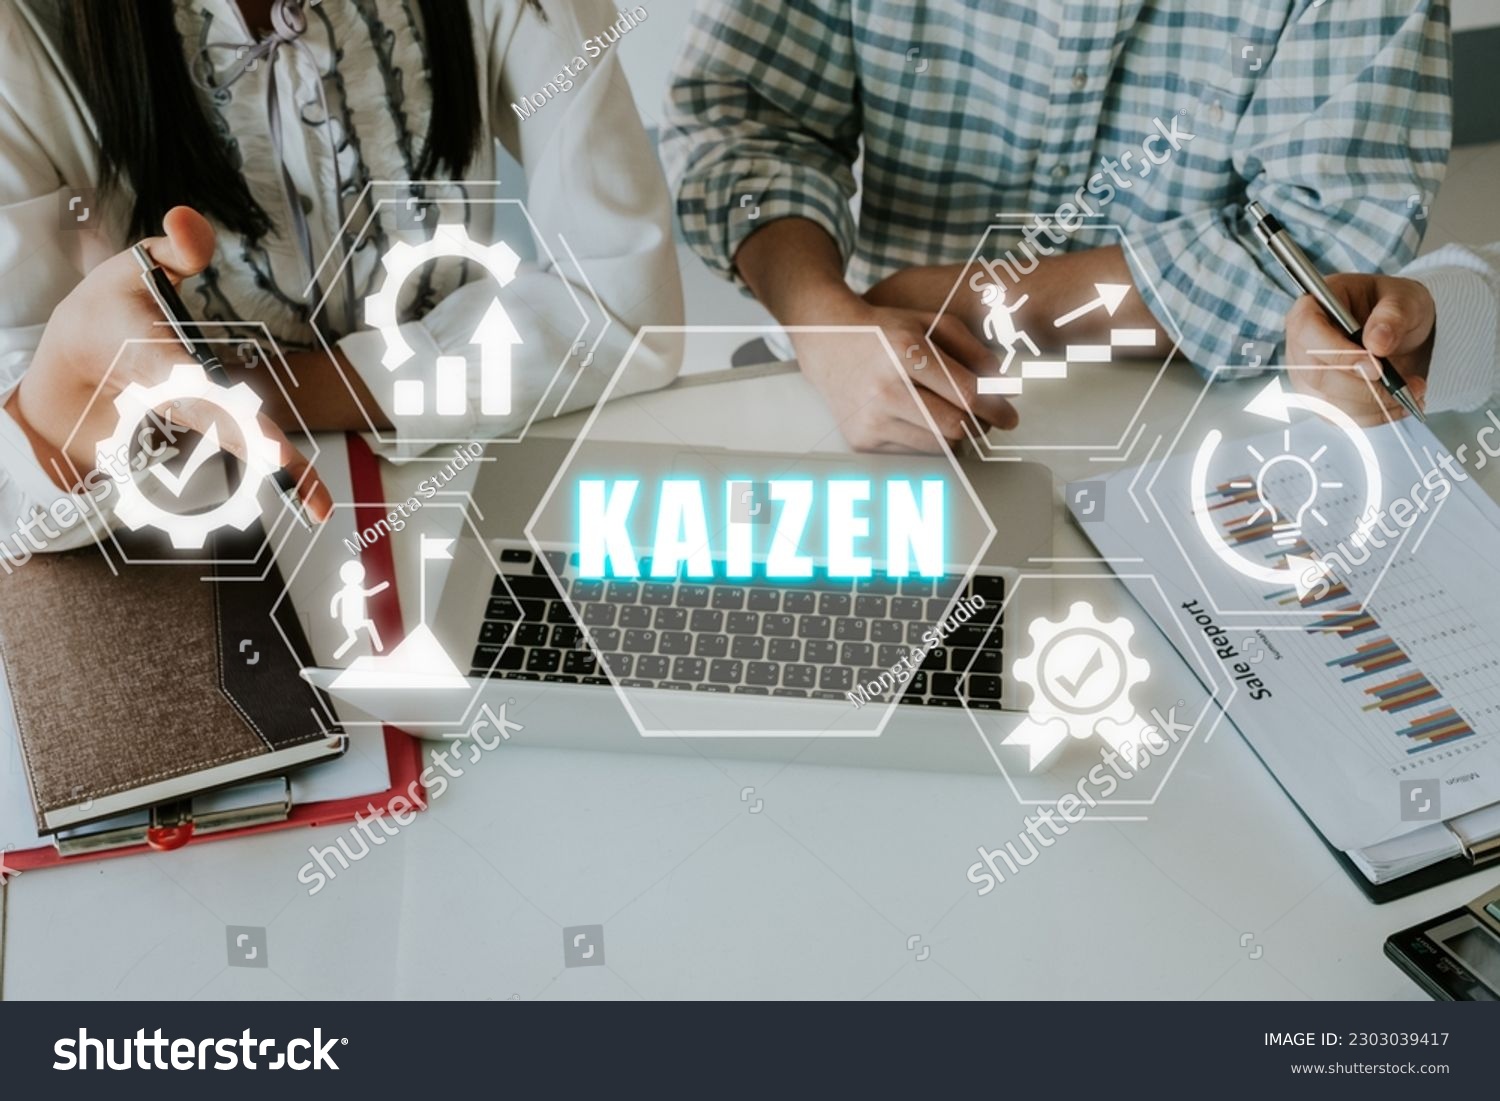 KAIZEN concept, Business person team working on analyzing financial data with kaizen icon on virtual screen, Business philosophy and corporate strategy concept of continual #2303039417